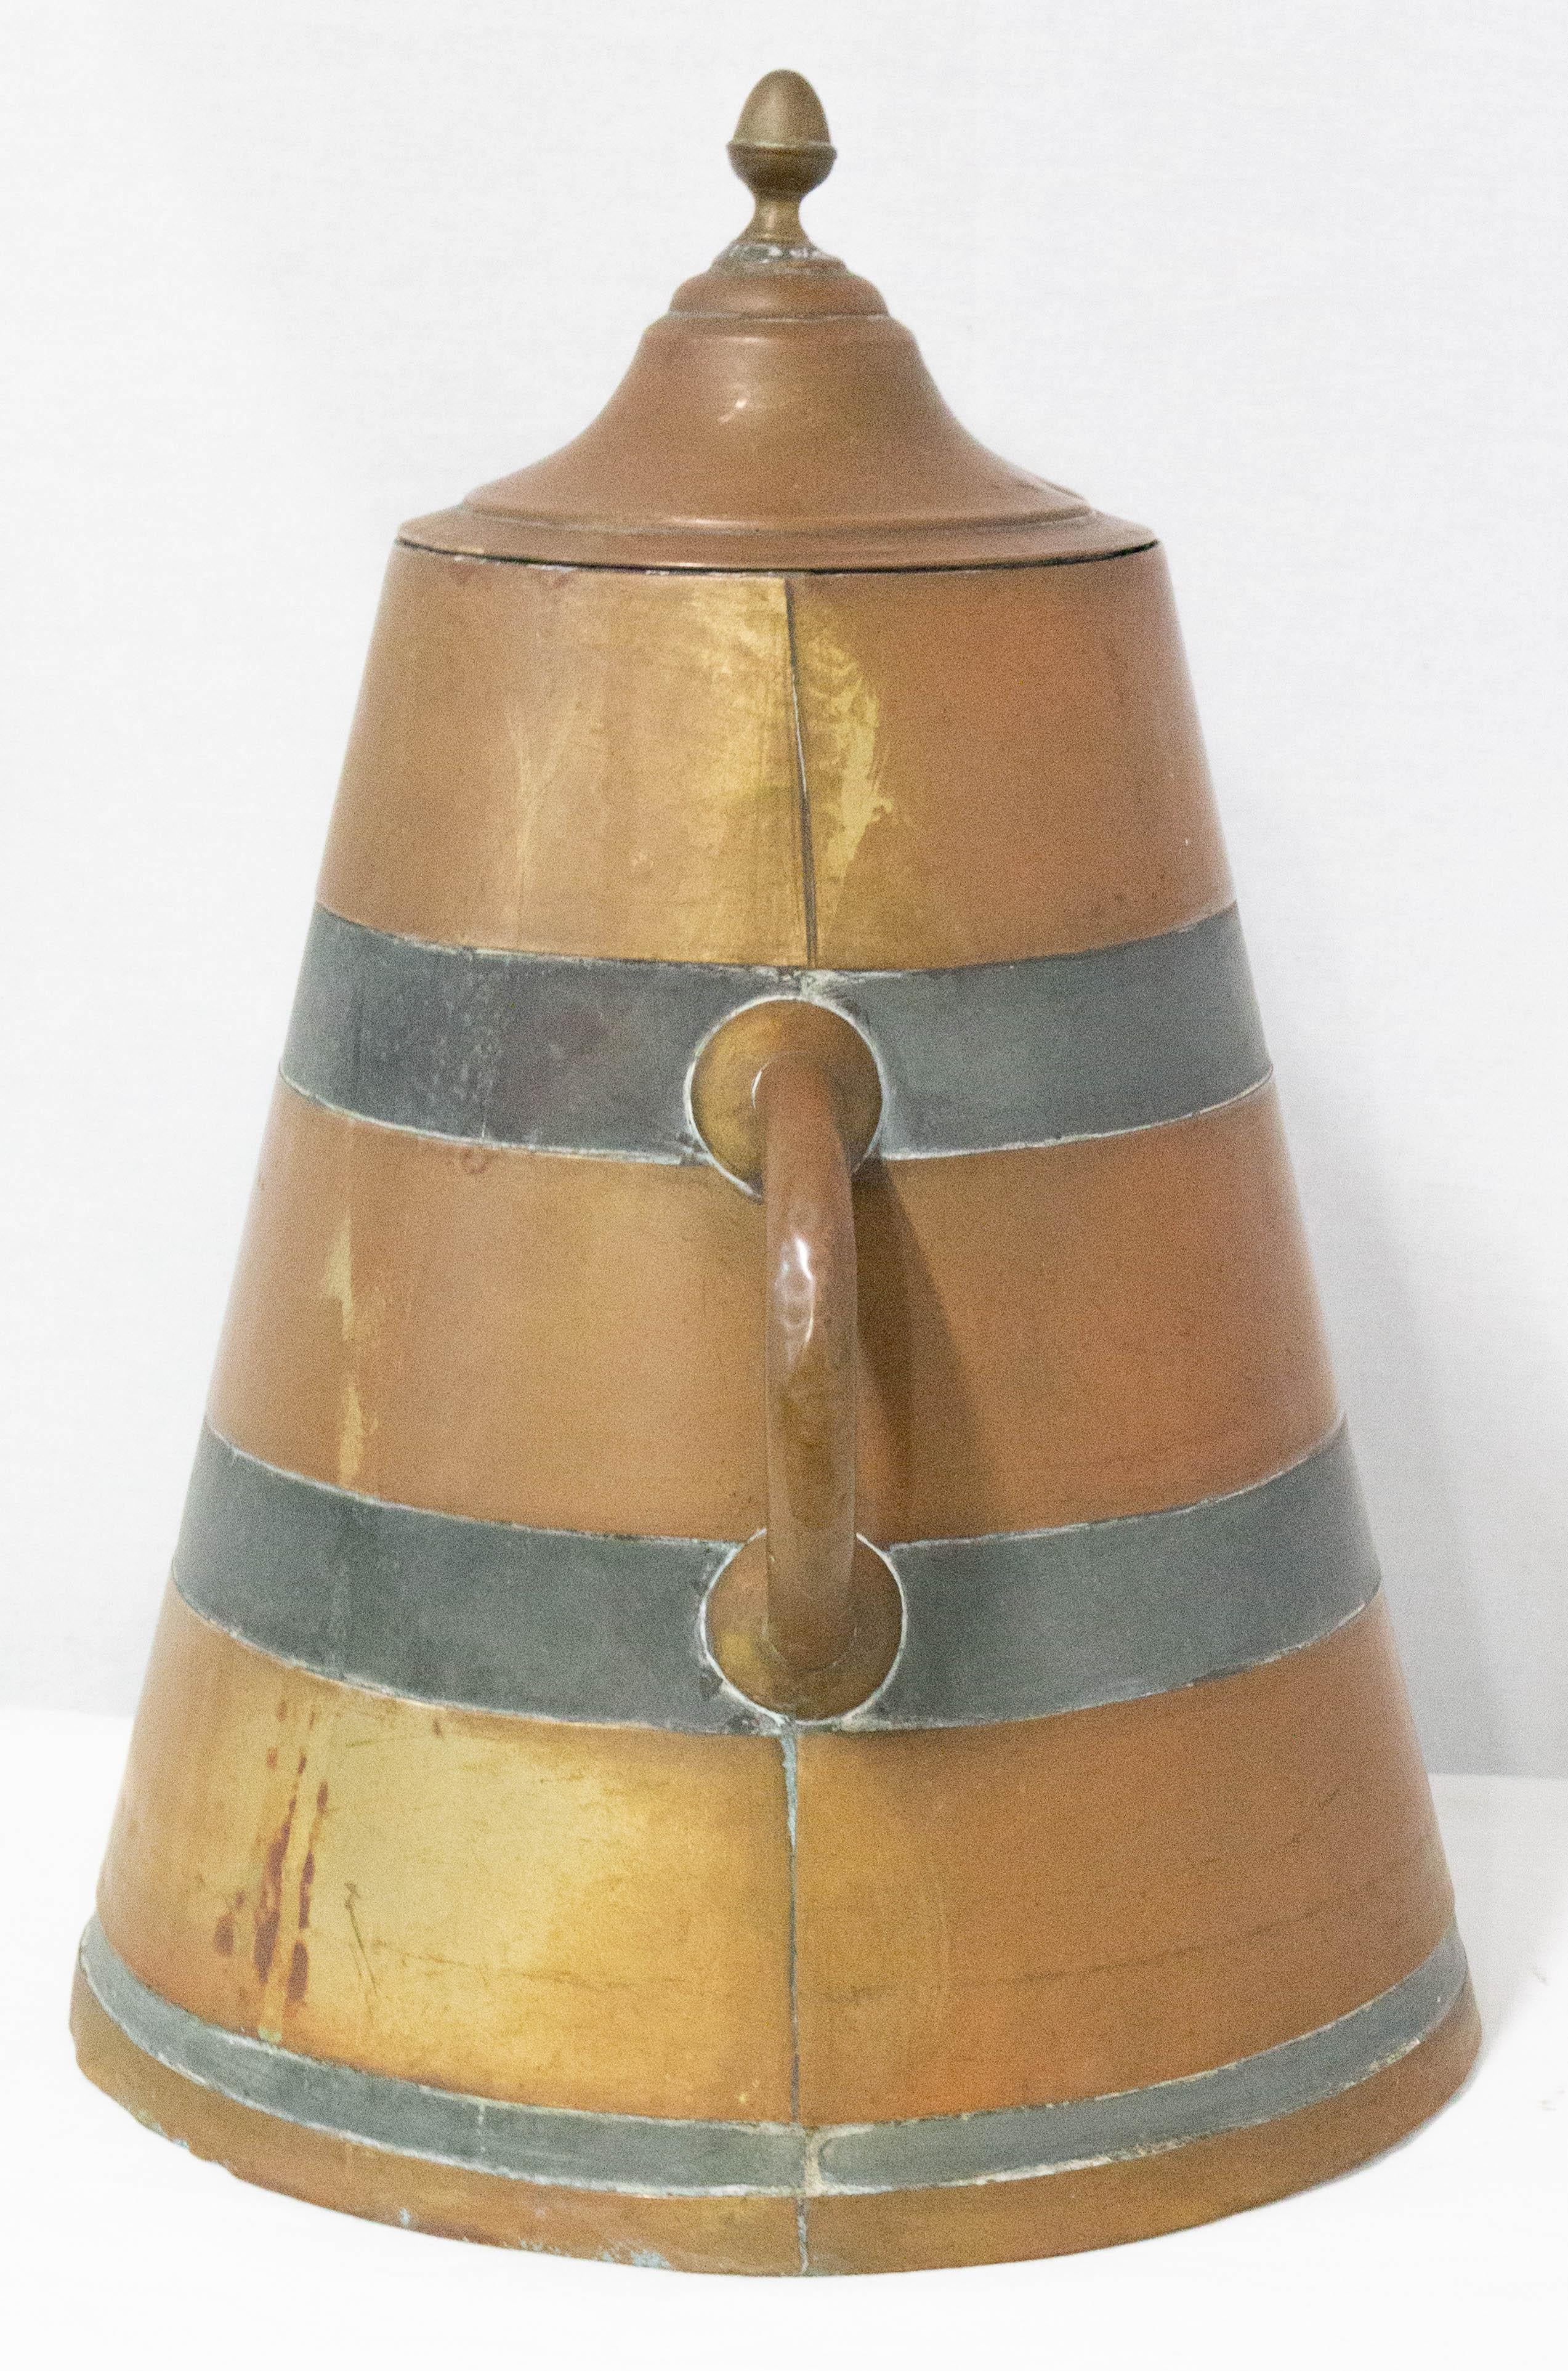 Zinc and copper Basque water holder very decorative
Herrade France 19th century
In Basque country, women were using this jar to bring water from the public fountain to their house.
They were holding the herrade on their head with a wicker